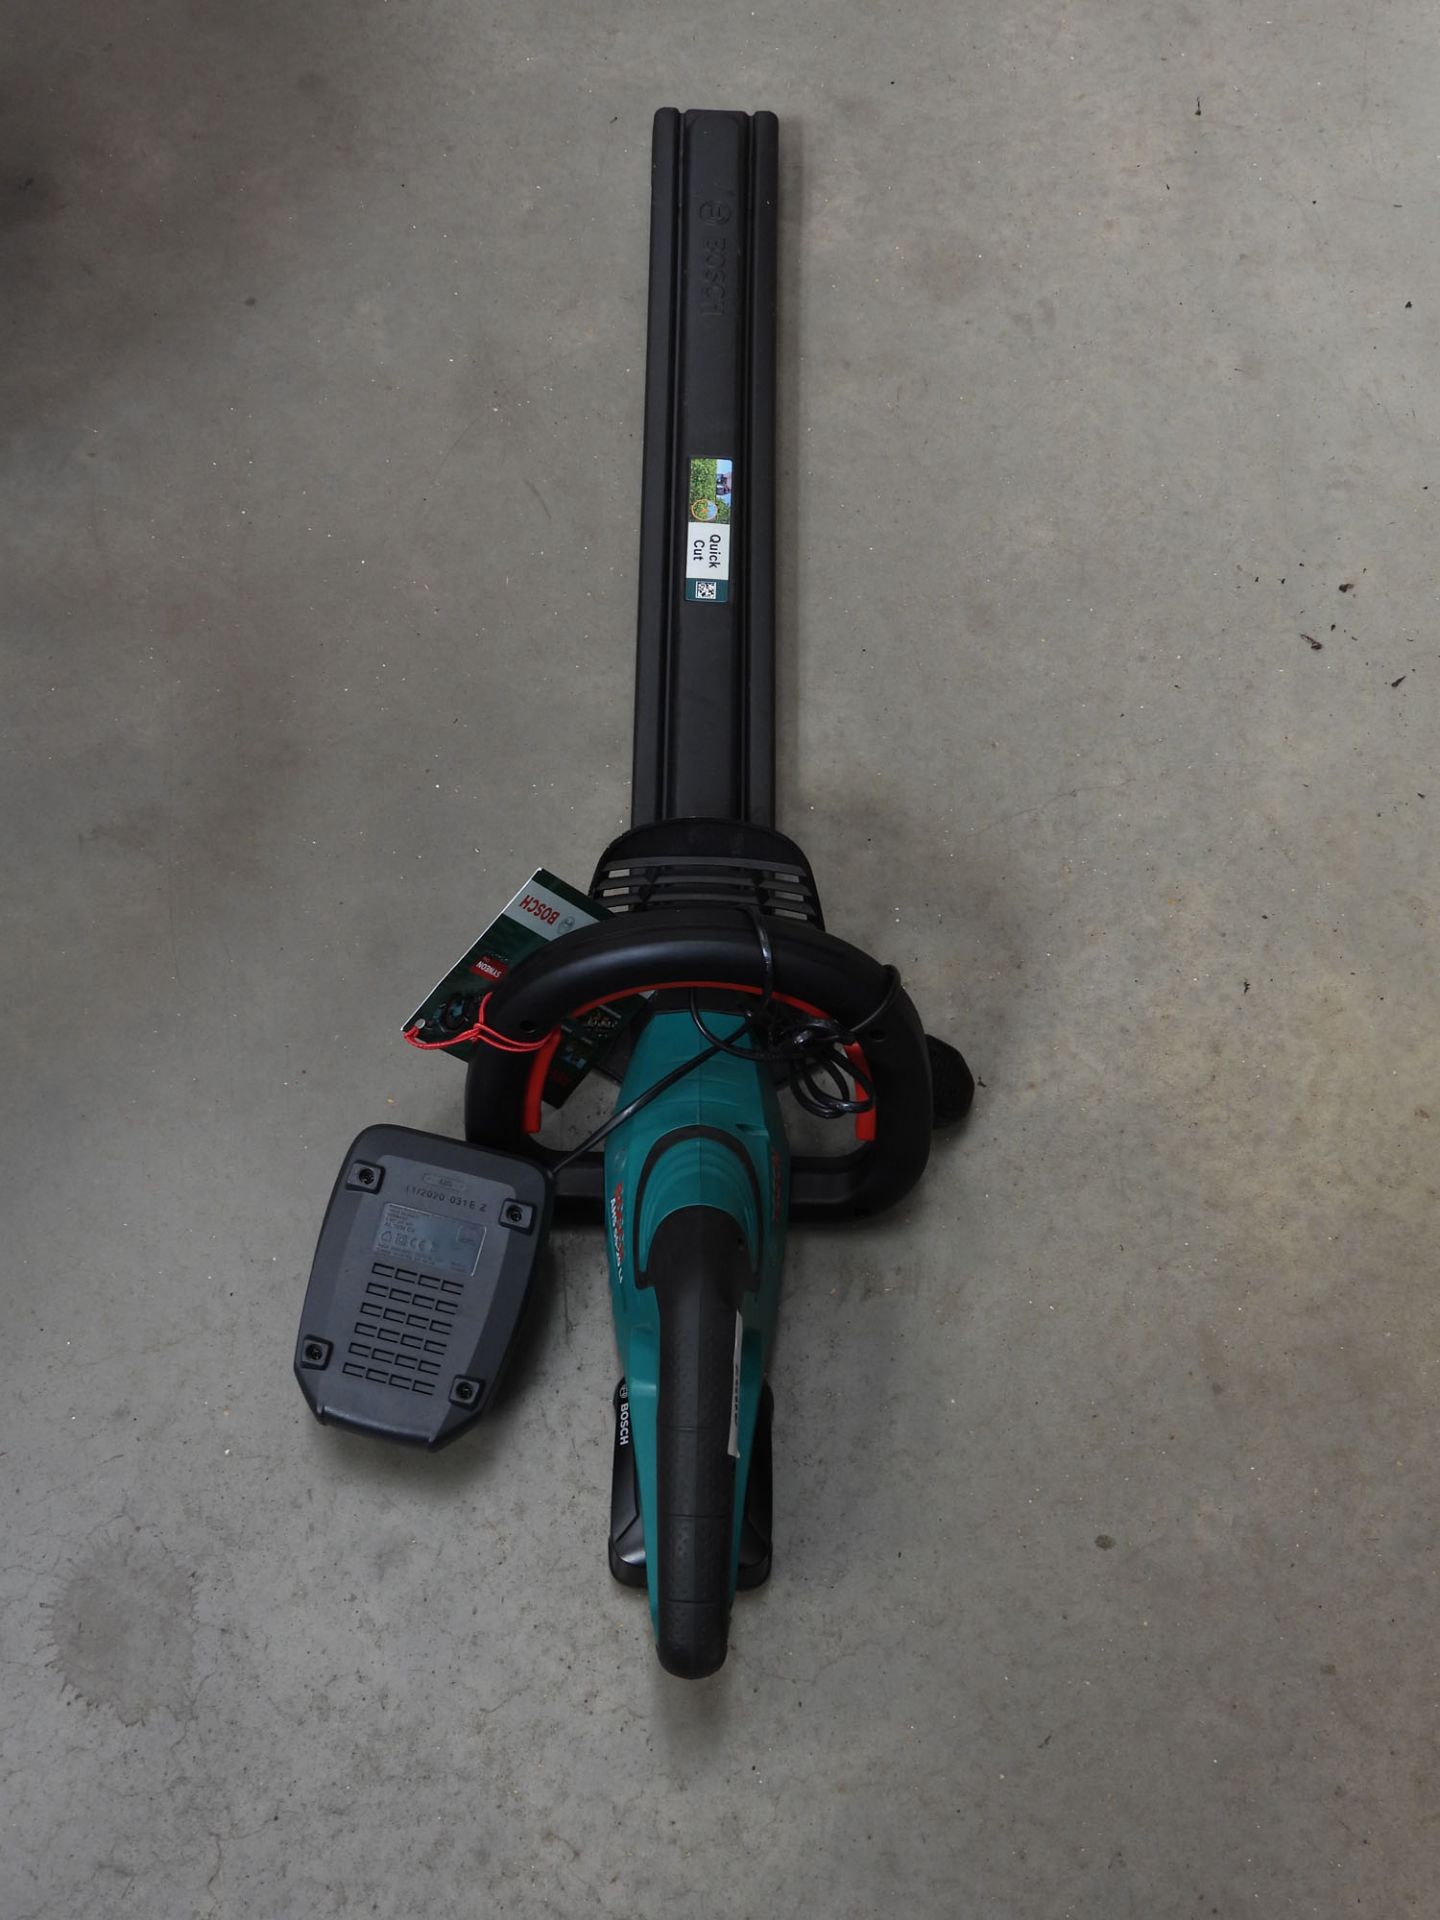 Bosch battery powered chain saw with 1 battery and charger